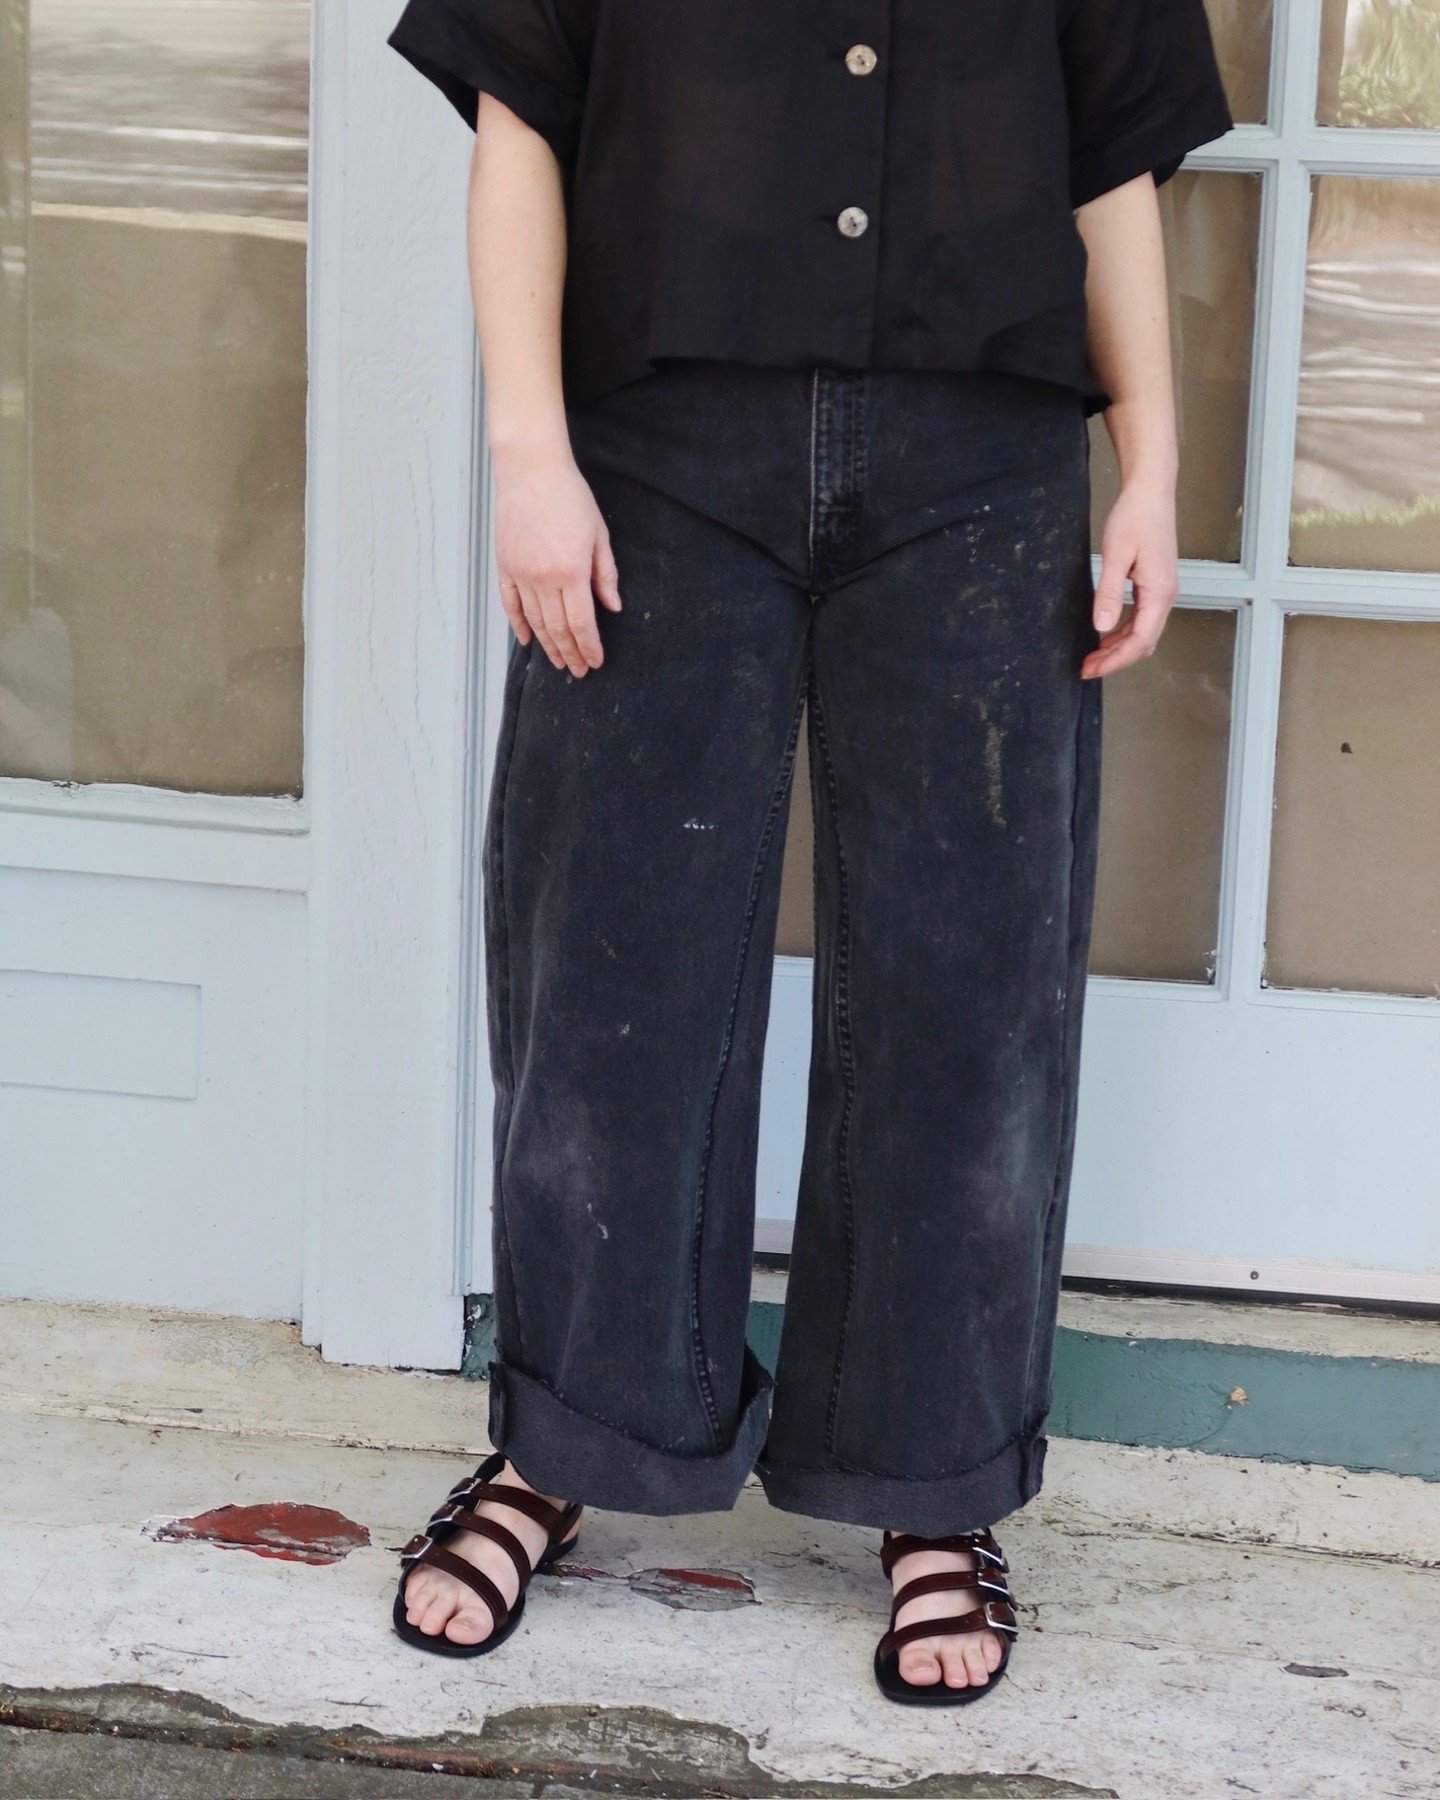 The Reworked Culottes in Vintage Black from @b_sides_jeans - a cool, mid rise fit in antique denim. Each pair is one-of-a-kind and will vary in shade, caste, color and fade pattern as they are made with authentic vintage Levi's 501's, collected in th